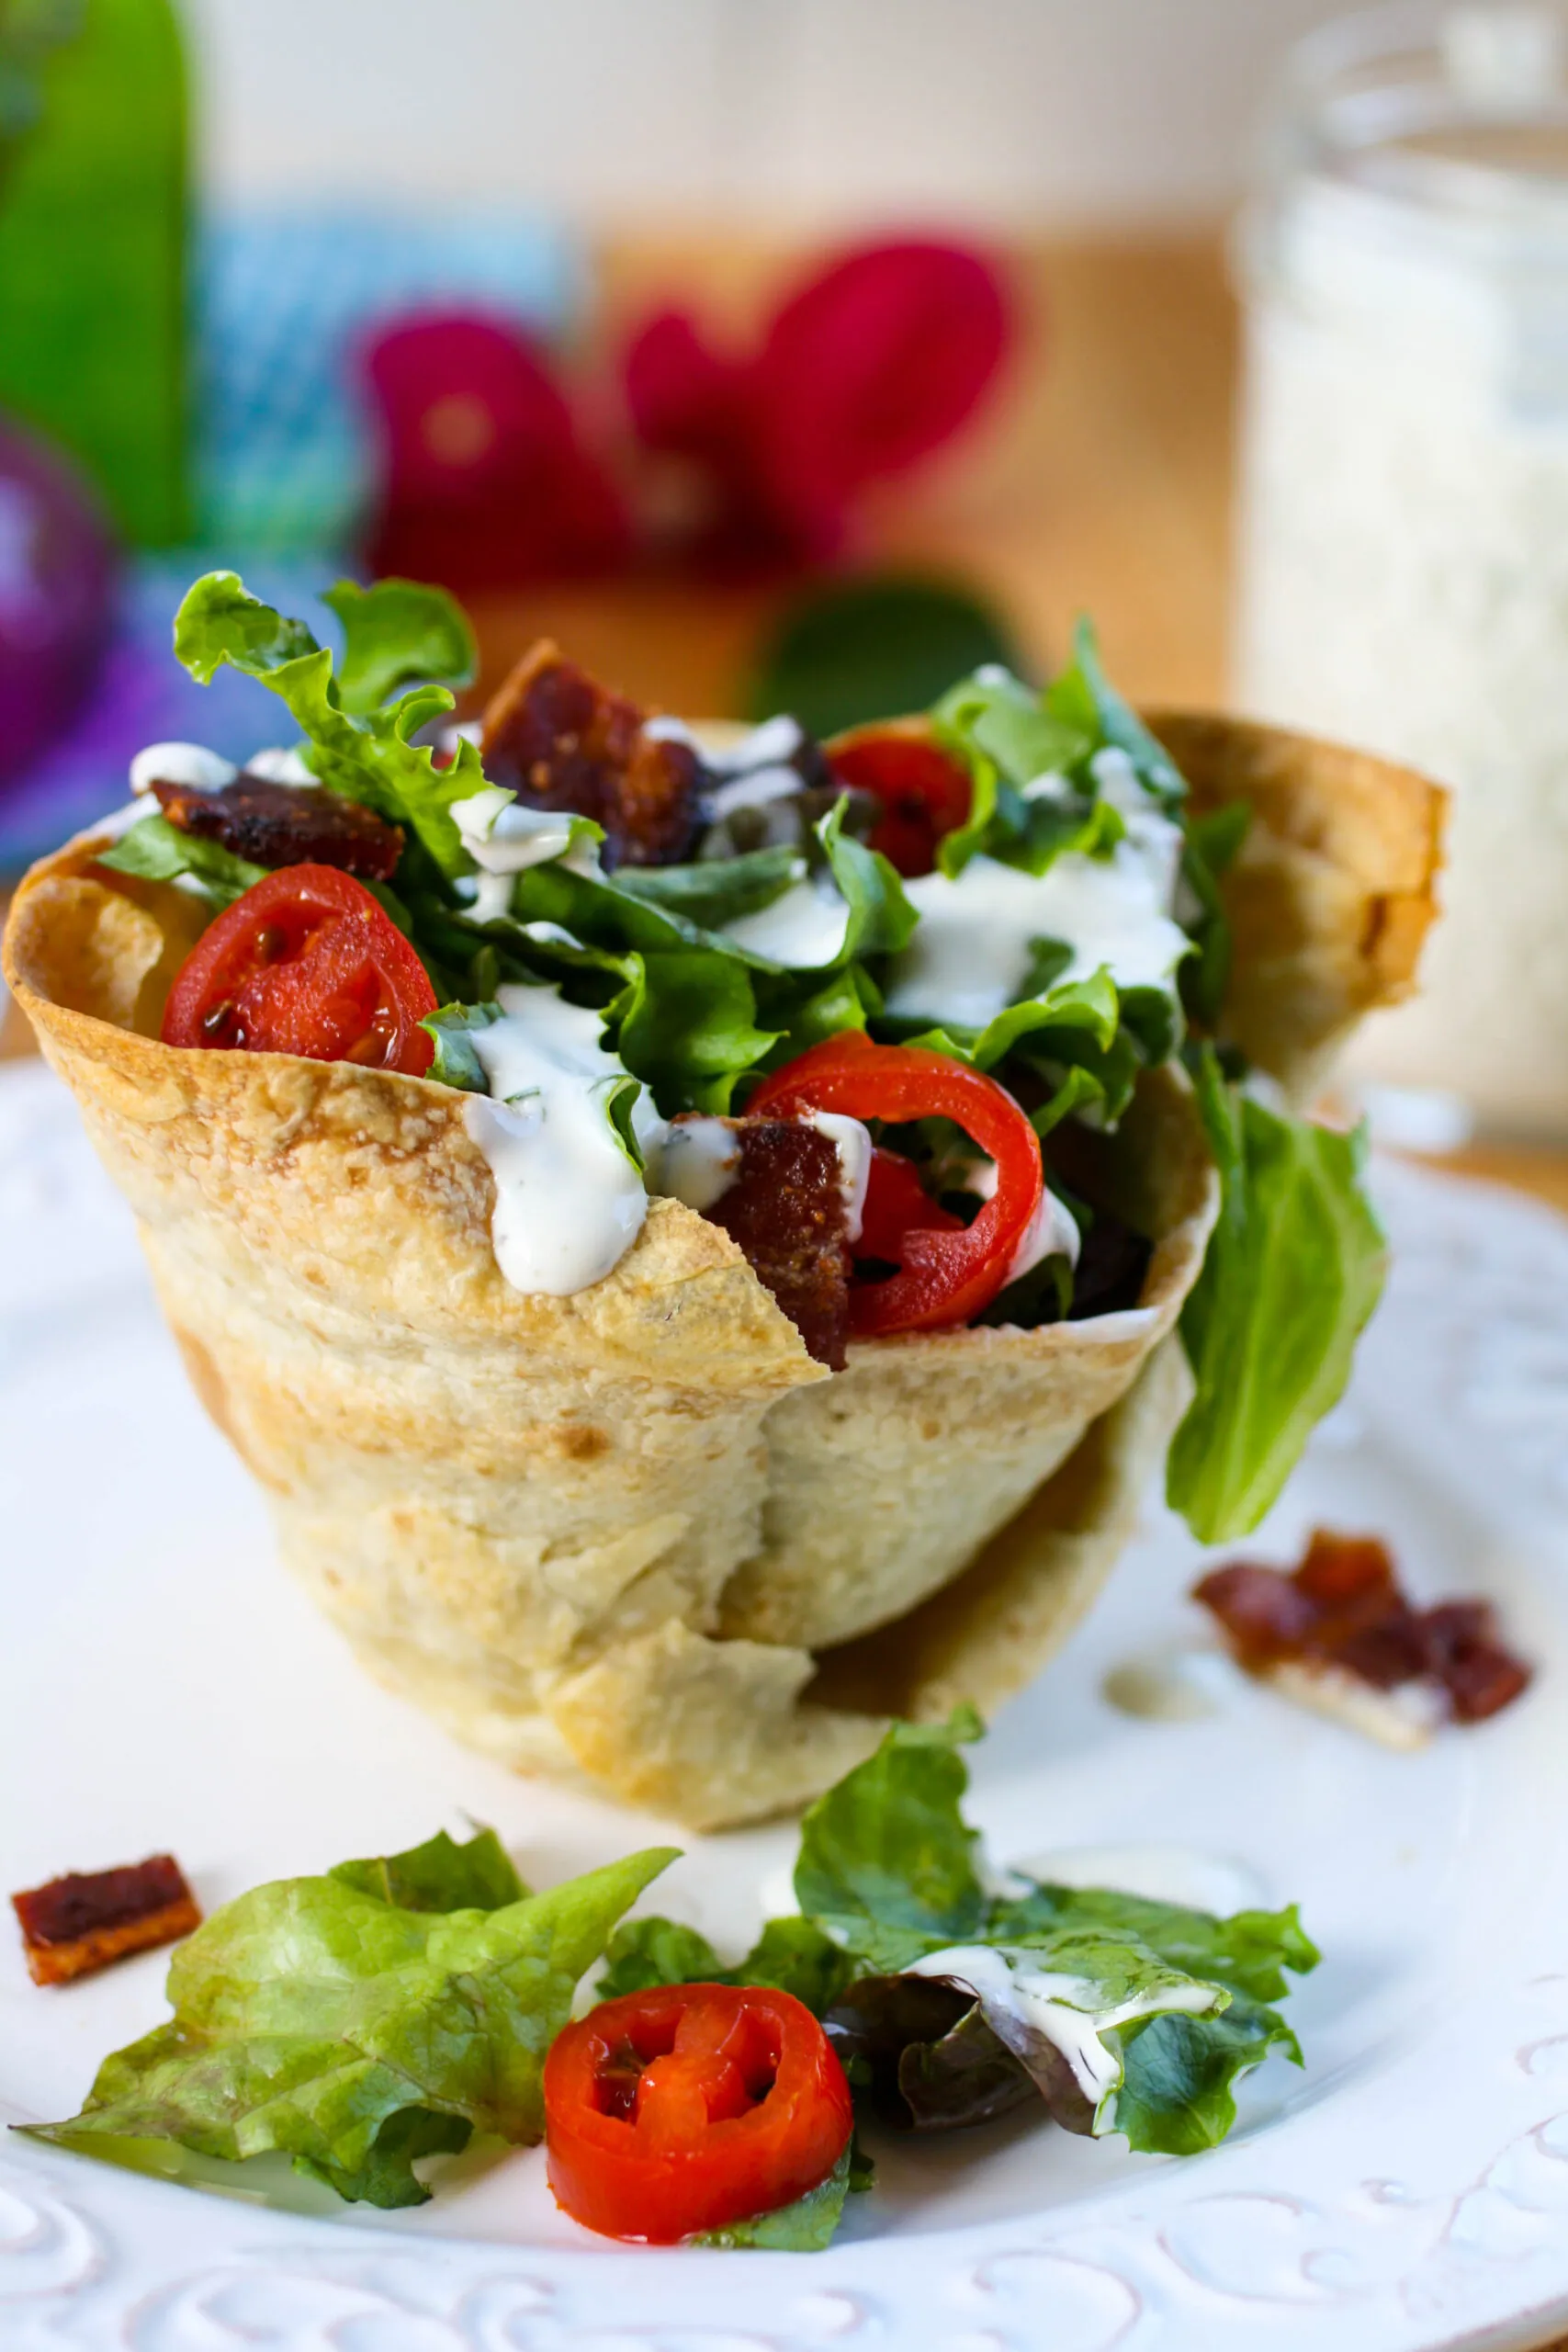 Side Salad in Tortilla Cups with Ranch Dressing are fun for a tasty, lighter meal.